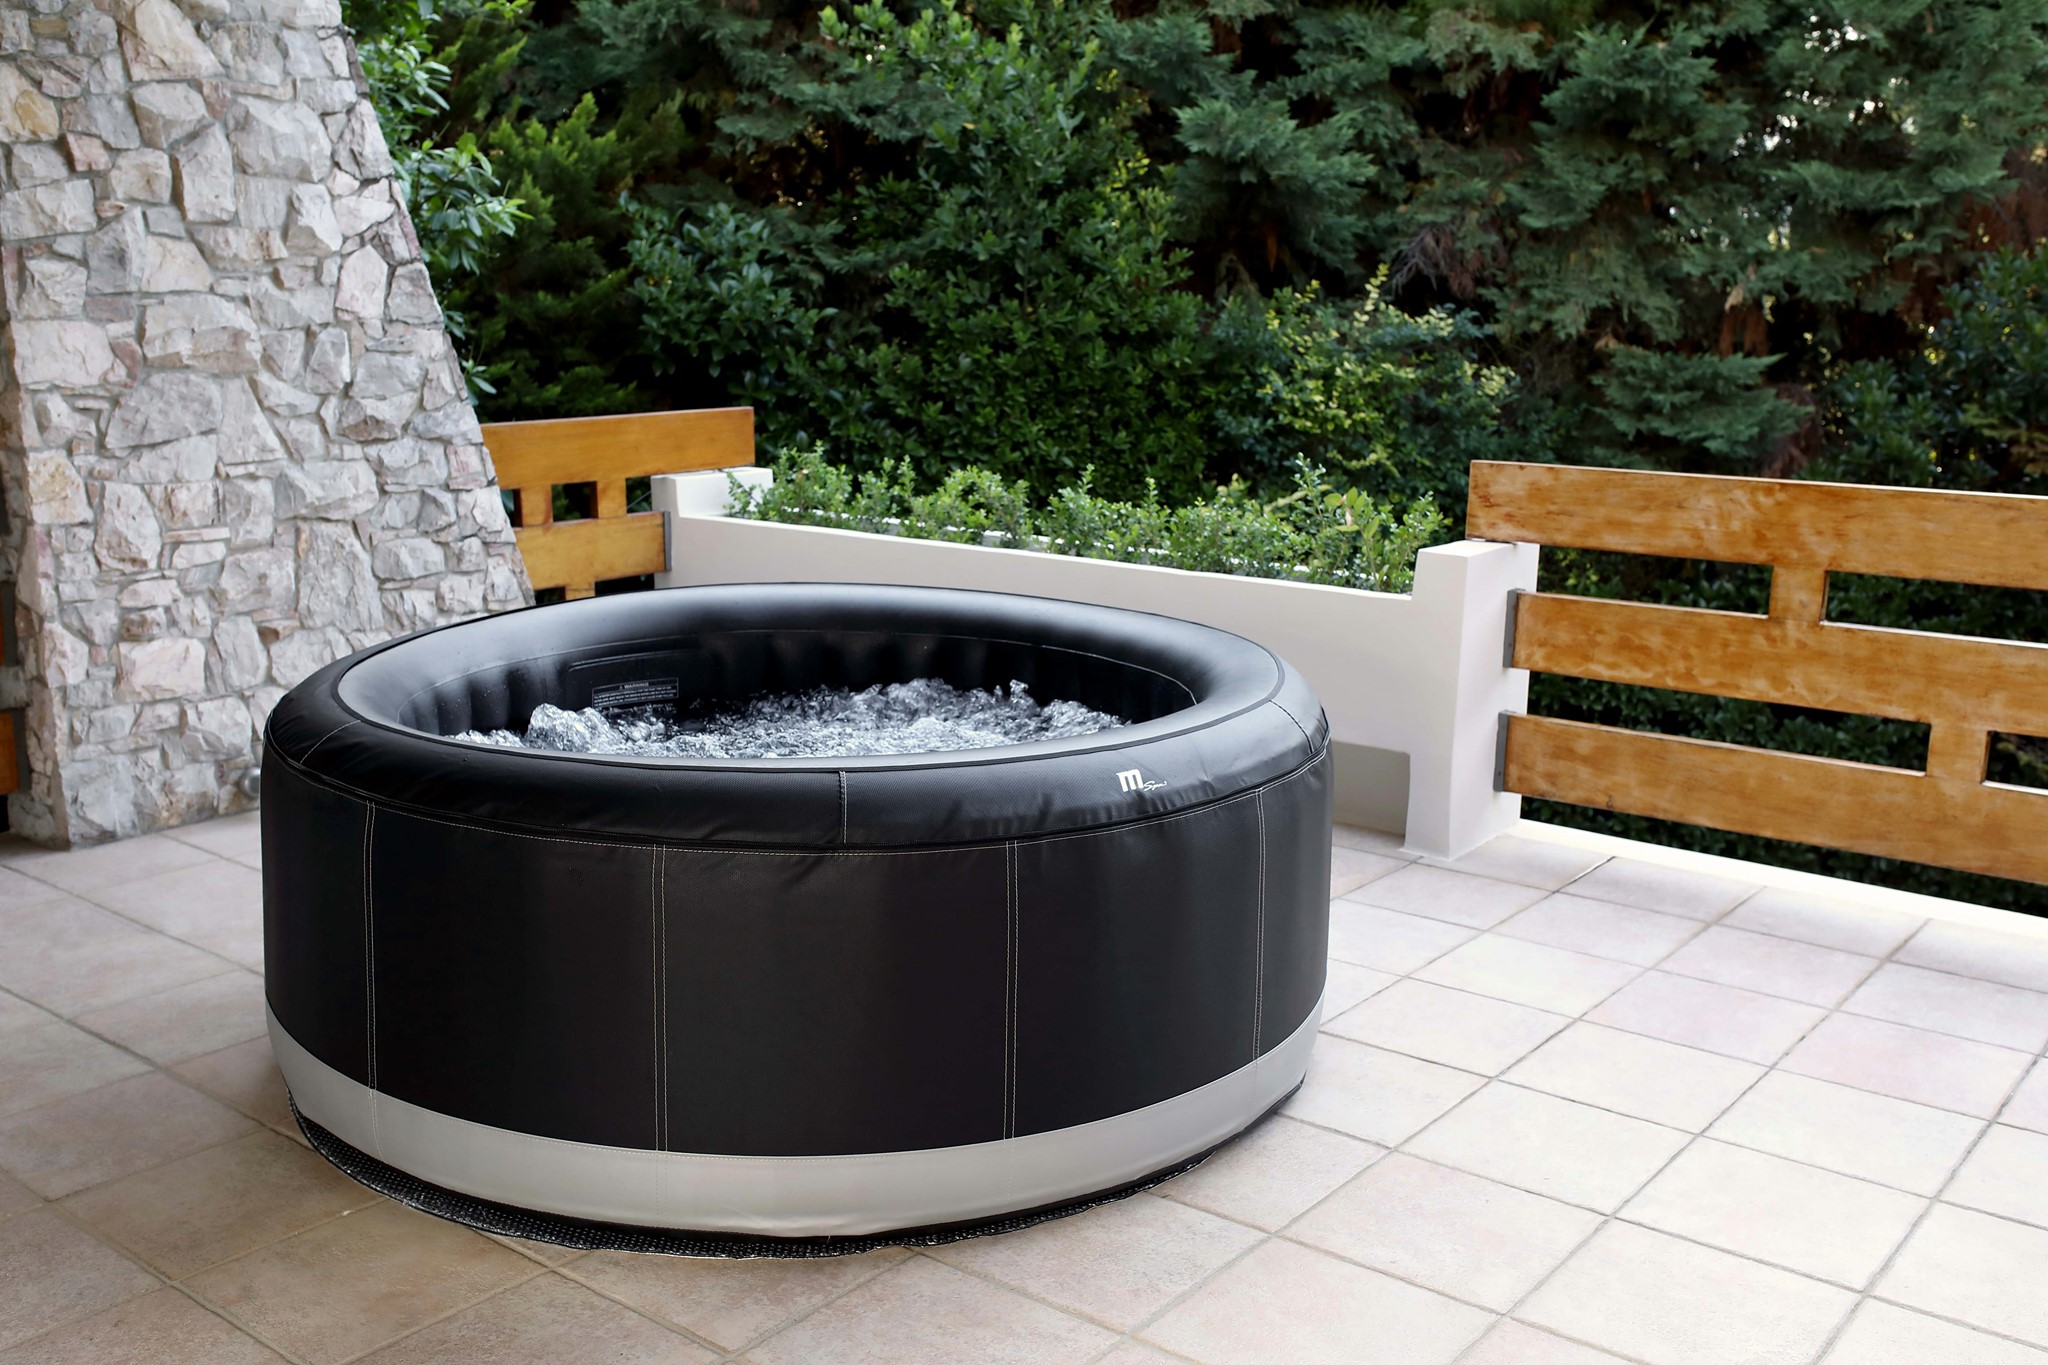 Pamper yourself with uplifting, renewing bubble spa. Perfectly placed air jets release thousands of cushioning bubbles t... » Outdoor Furniture Fuengirola, Costa Del Sol, Spain